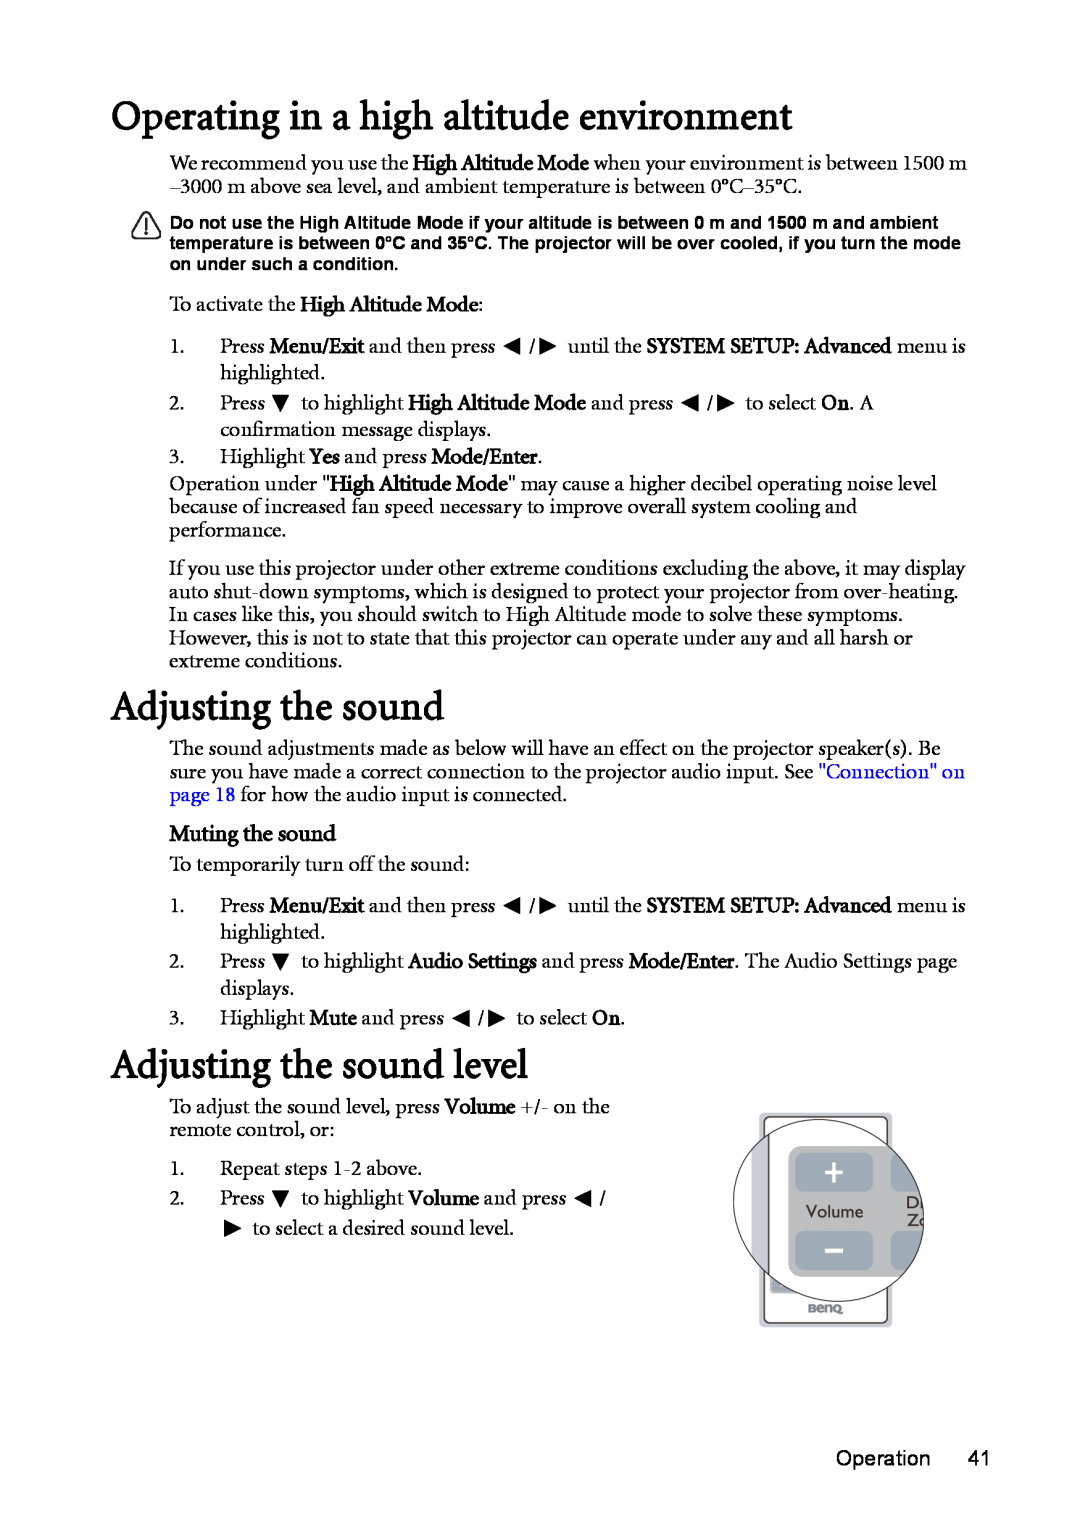 BenQ MP625P user manual Operating in a high altitude environment, Adjusting the sound level, Muting the sound 